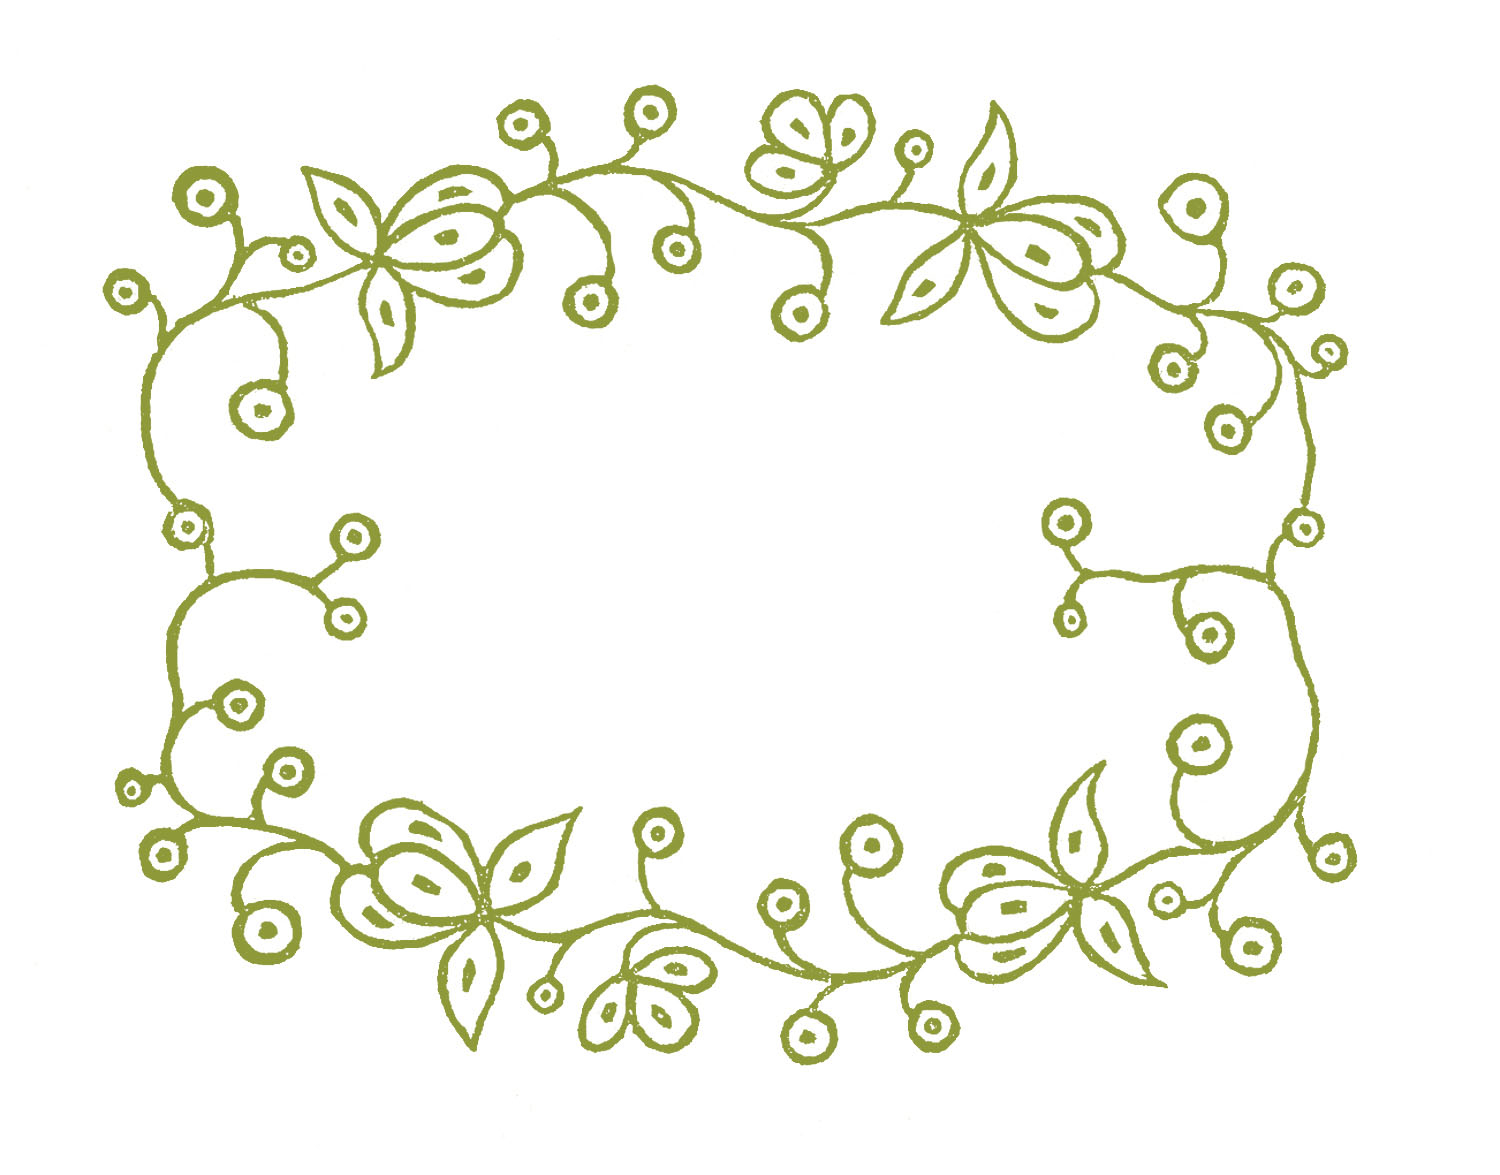 Vintage Embroidery Patterns Free Royalty Free Images Embroidery Patterns Floral Frames The